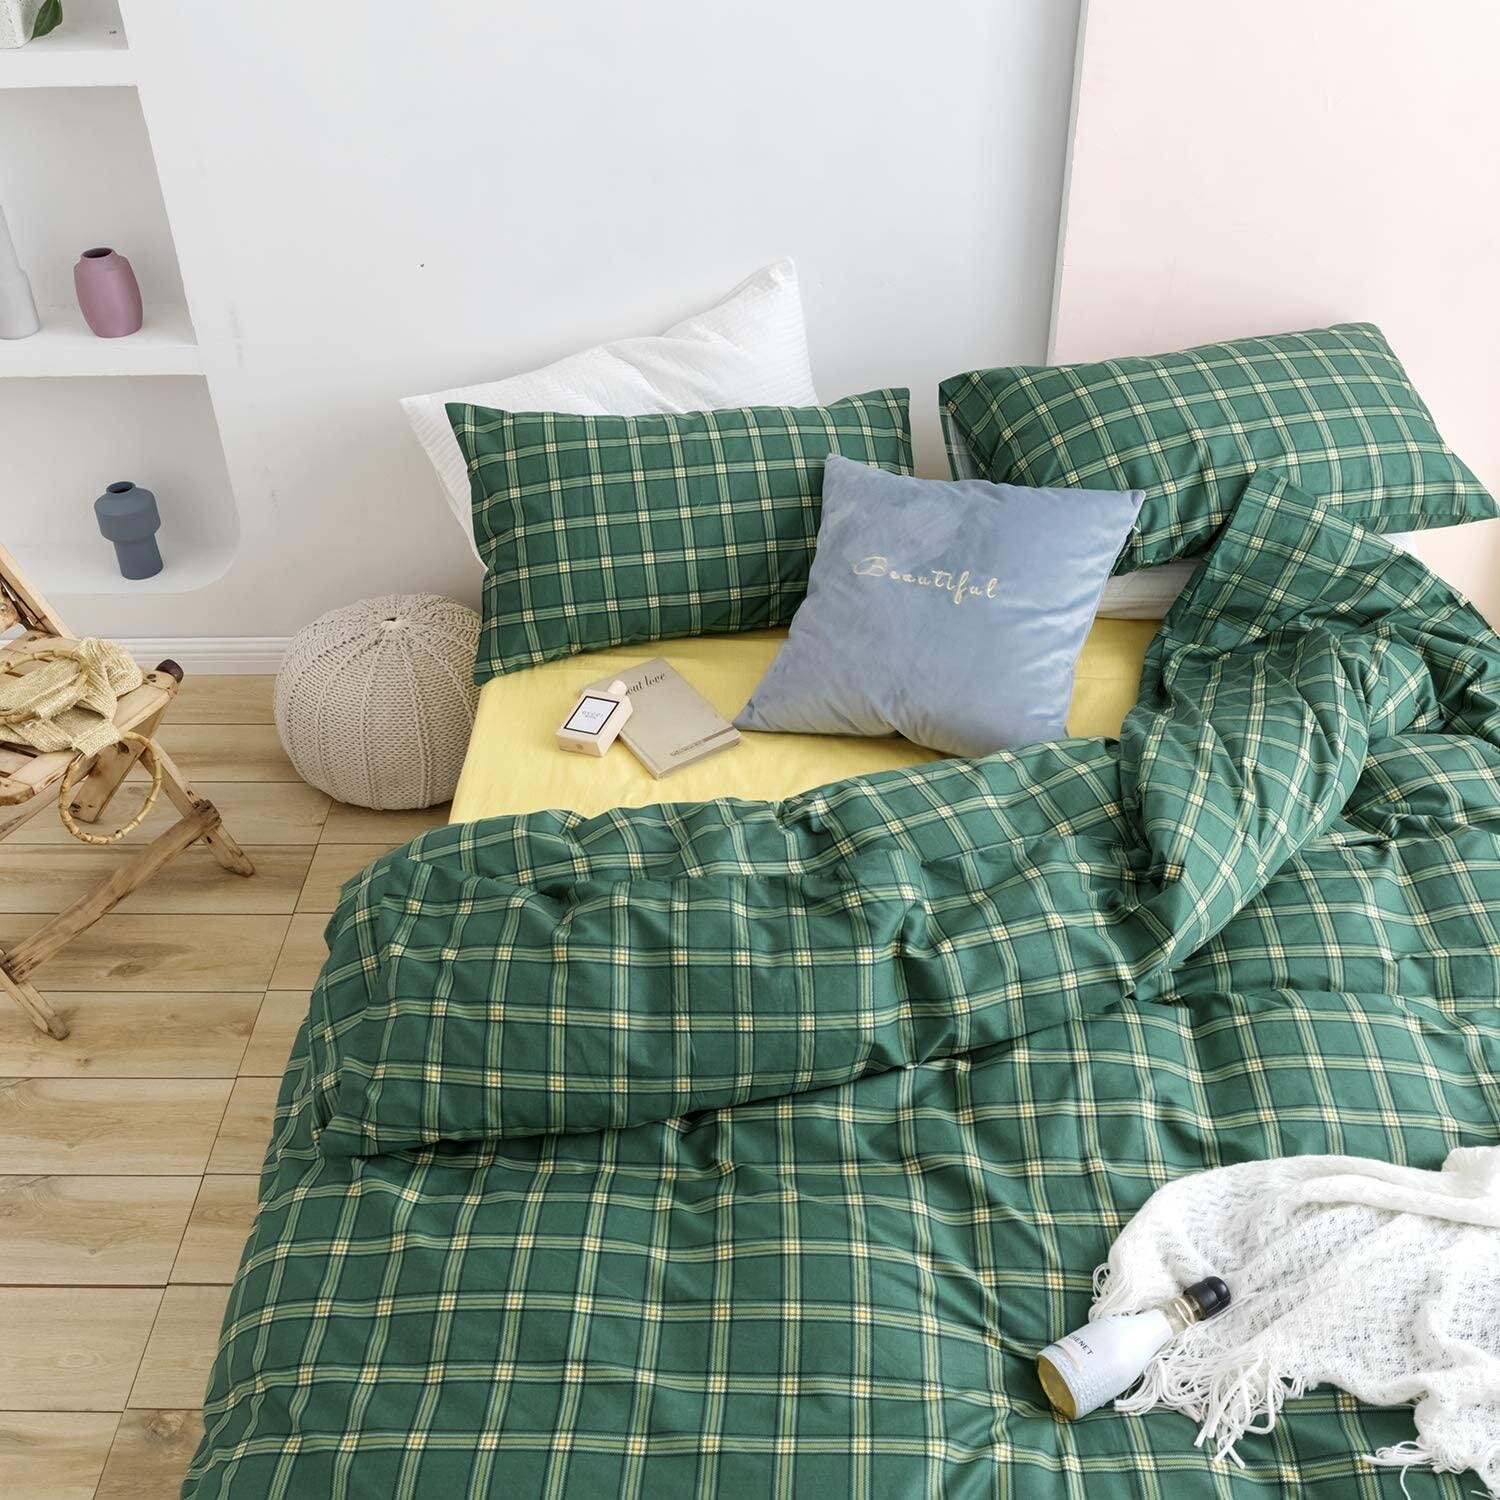 Green and Yellow Plaid Quilt Cover Pillow Case King Queen Full Geometric Bedding